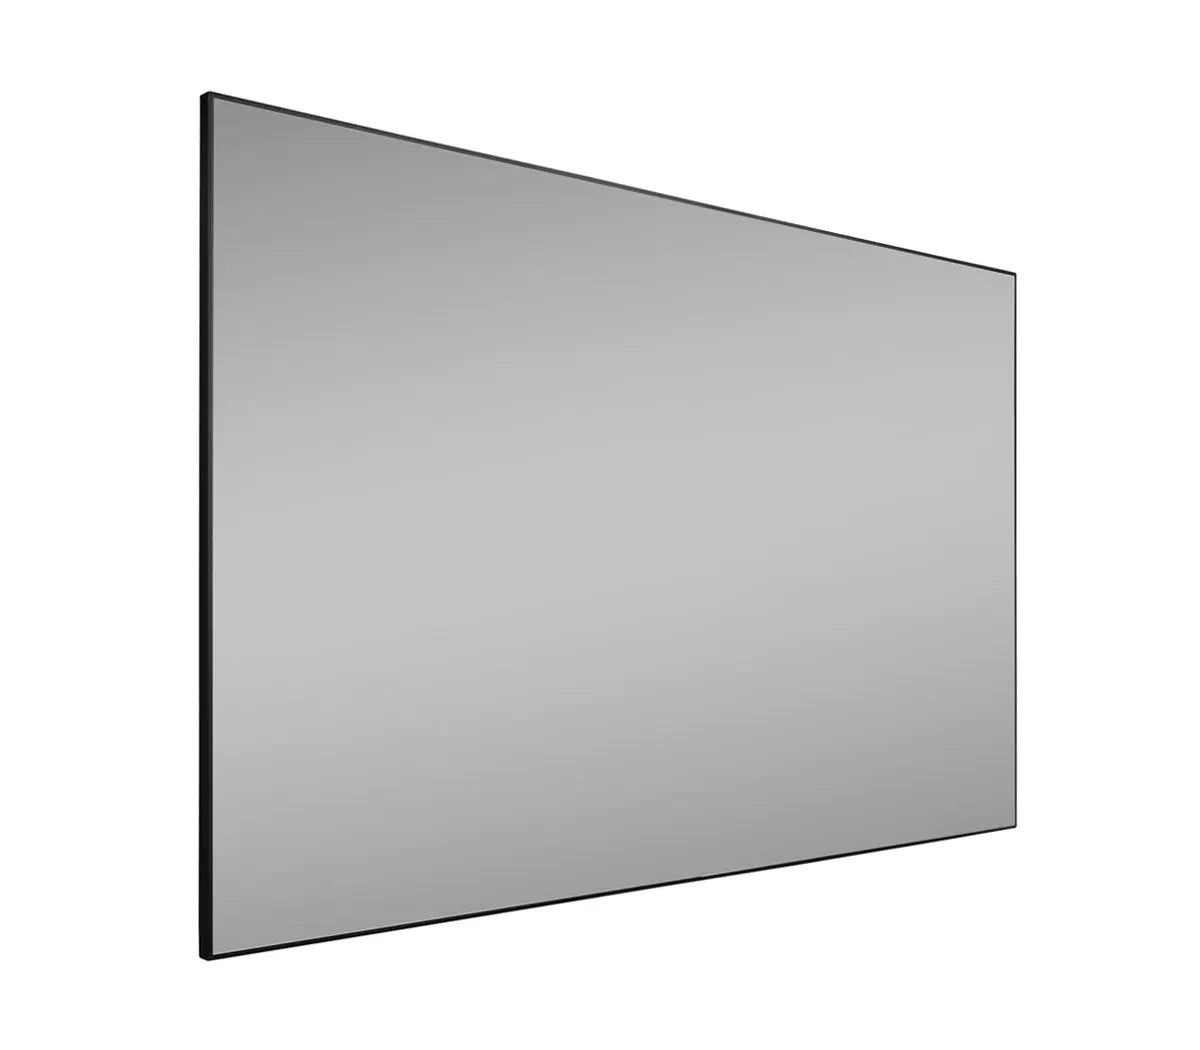 Grandview 100" ALR Fixed Frame 16:9 For Ultra Short Throw Projector Screen - GV-ALRUST100H - Masters Voice Audio Visual